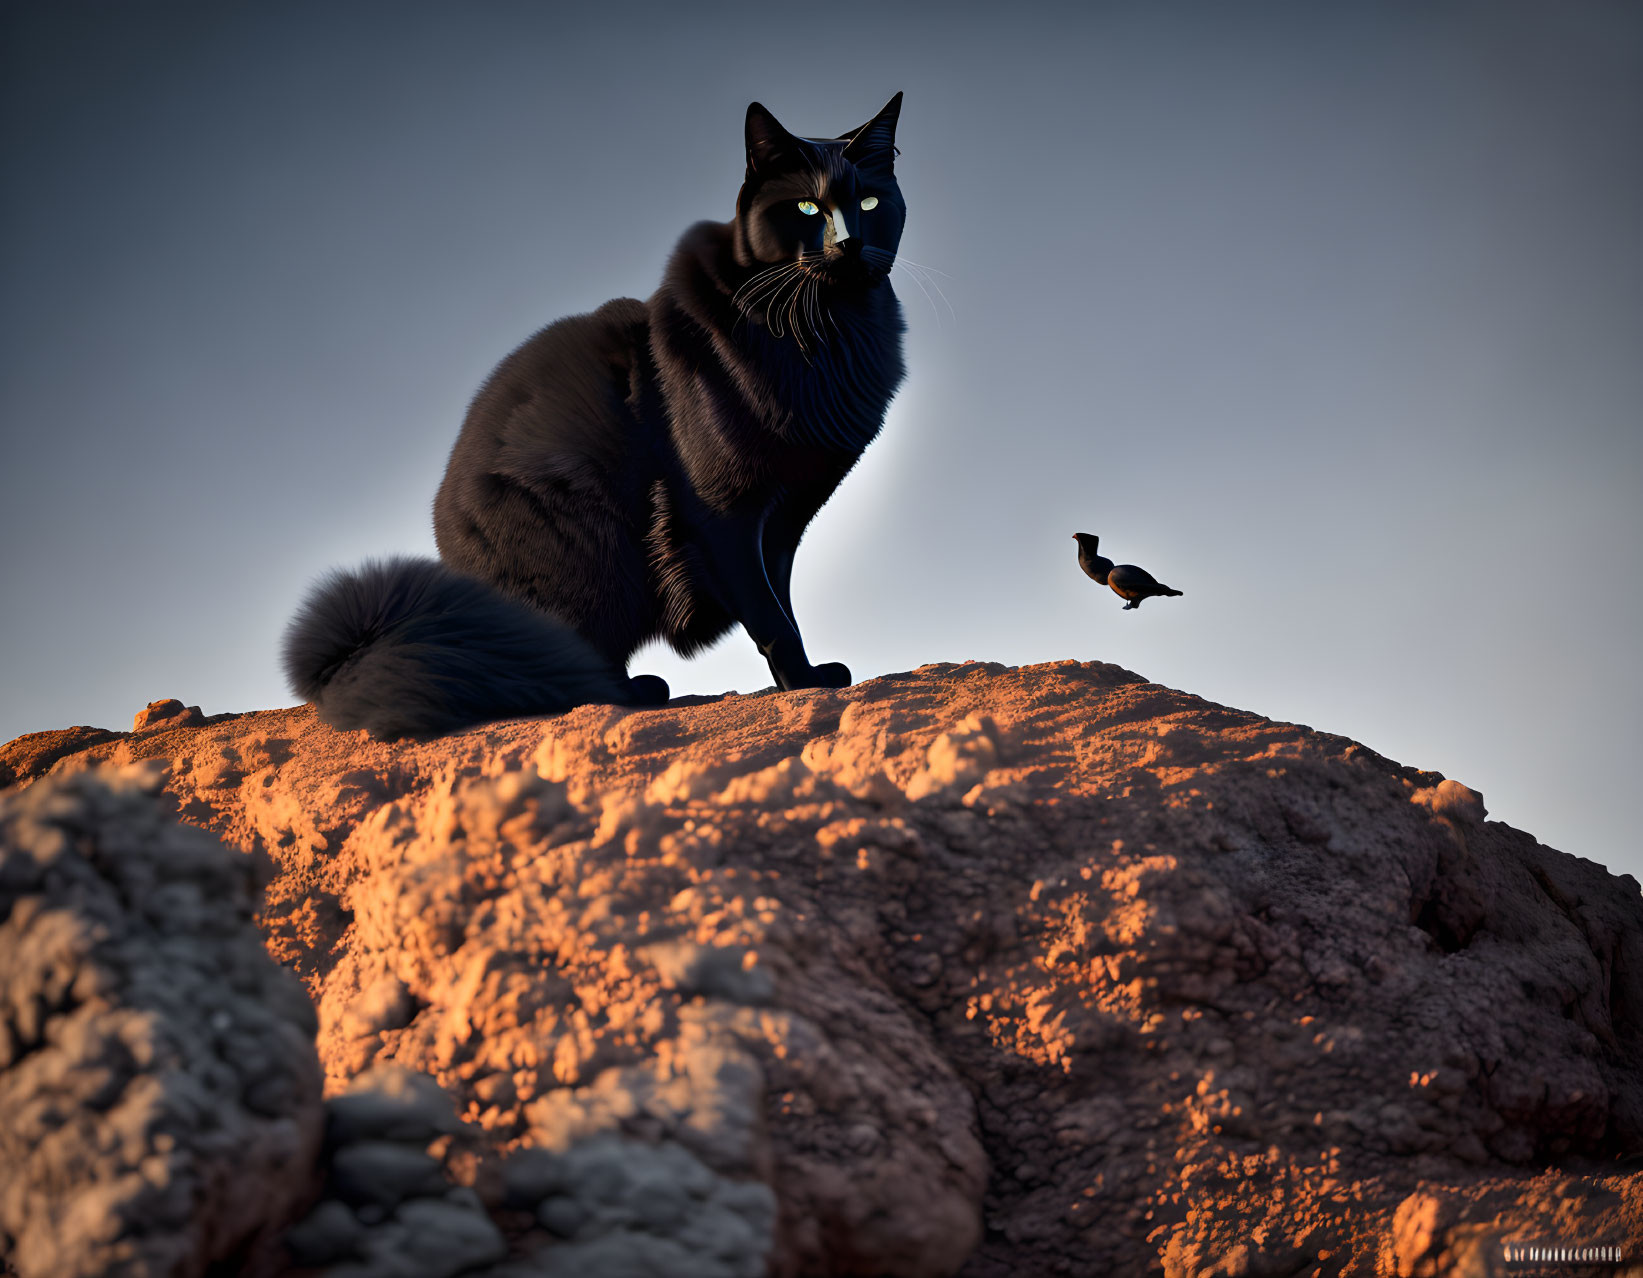 Black Cat with Striking Eyes Watching Bird on Outcrop at Twilight